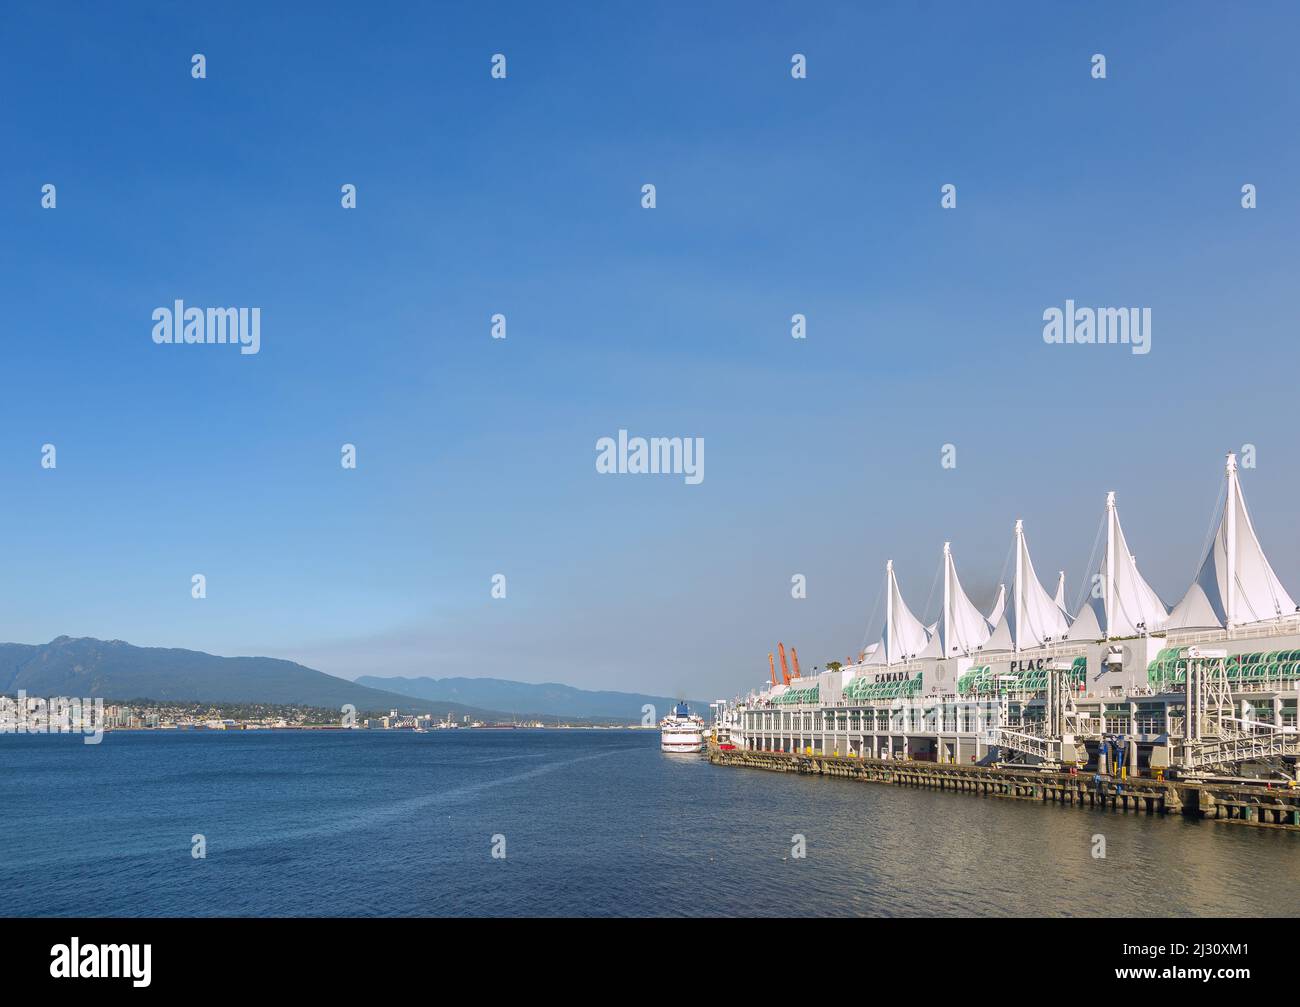 Vancouver Canada Place Foto Stock